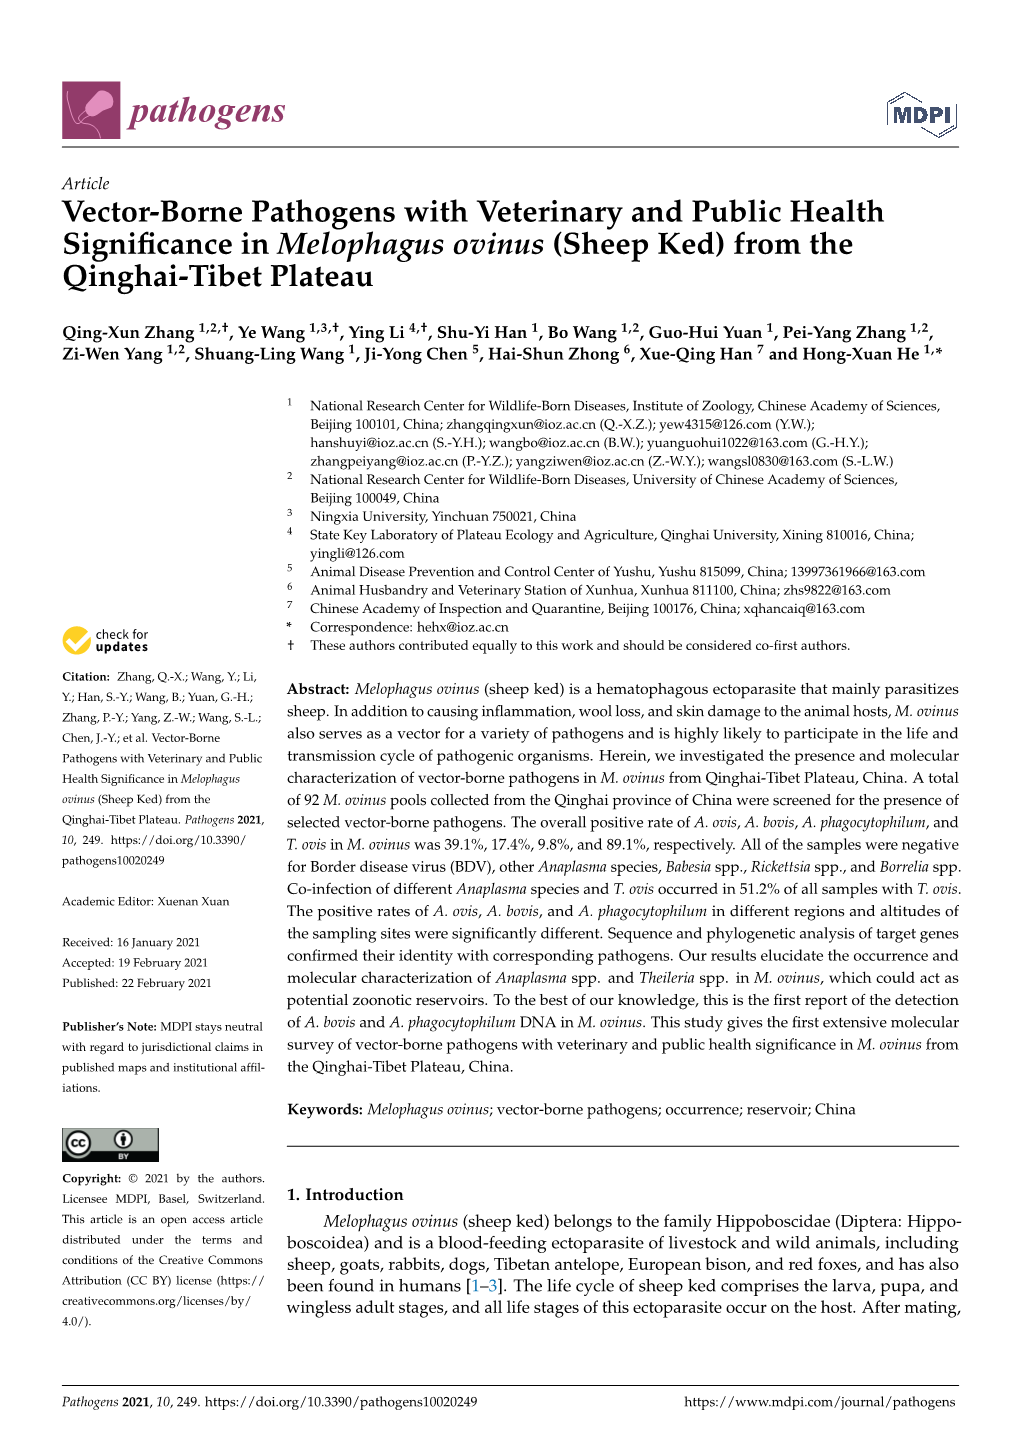 Vector-Borne Pathogens with Veterinary and Public Health Signiﬁcance in Melophagus Ovinus (Sheep Ked) from the Qinghai-Tibet Plateau